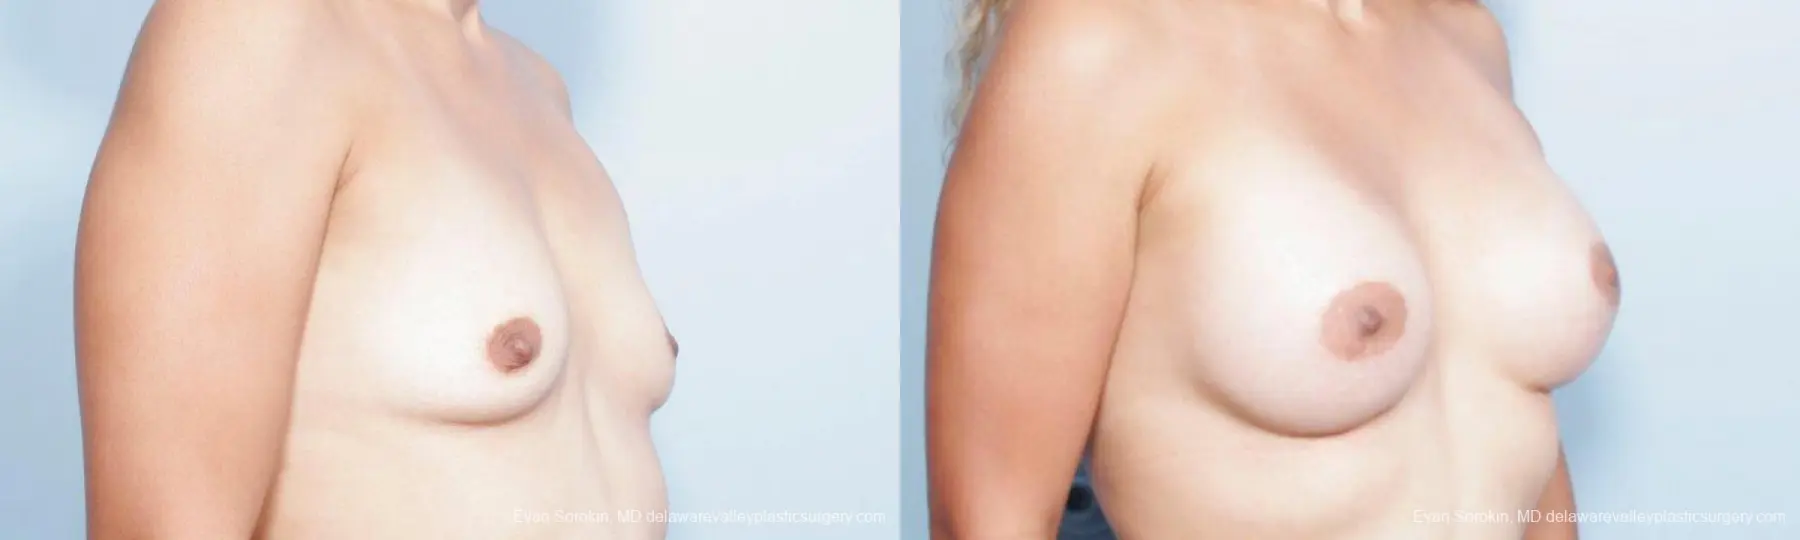 Philadelphia Breast Augmentation 9347 - Before and After 2